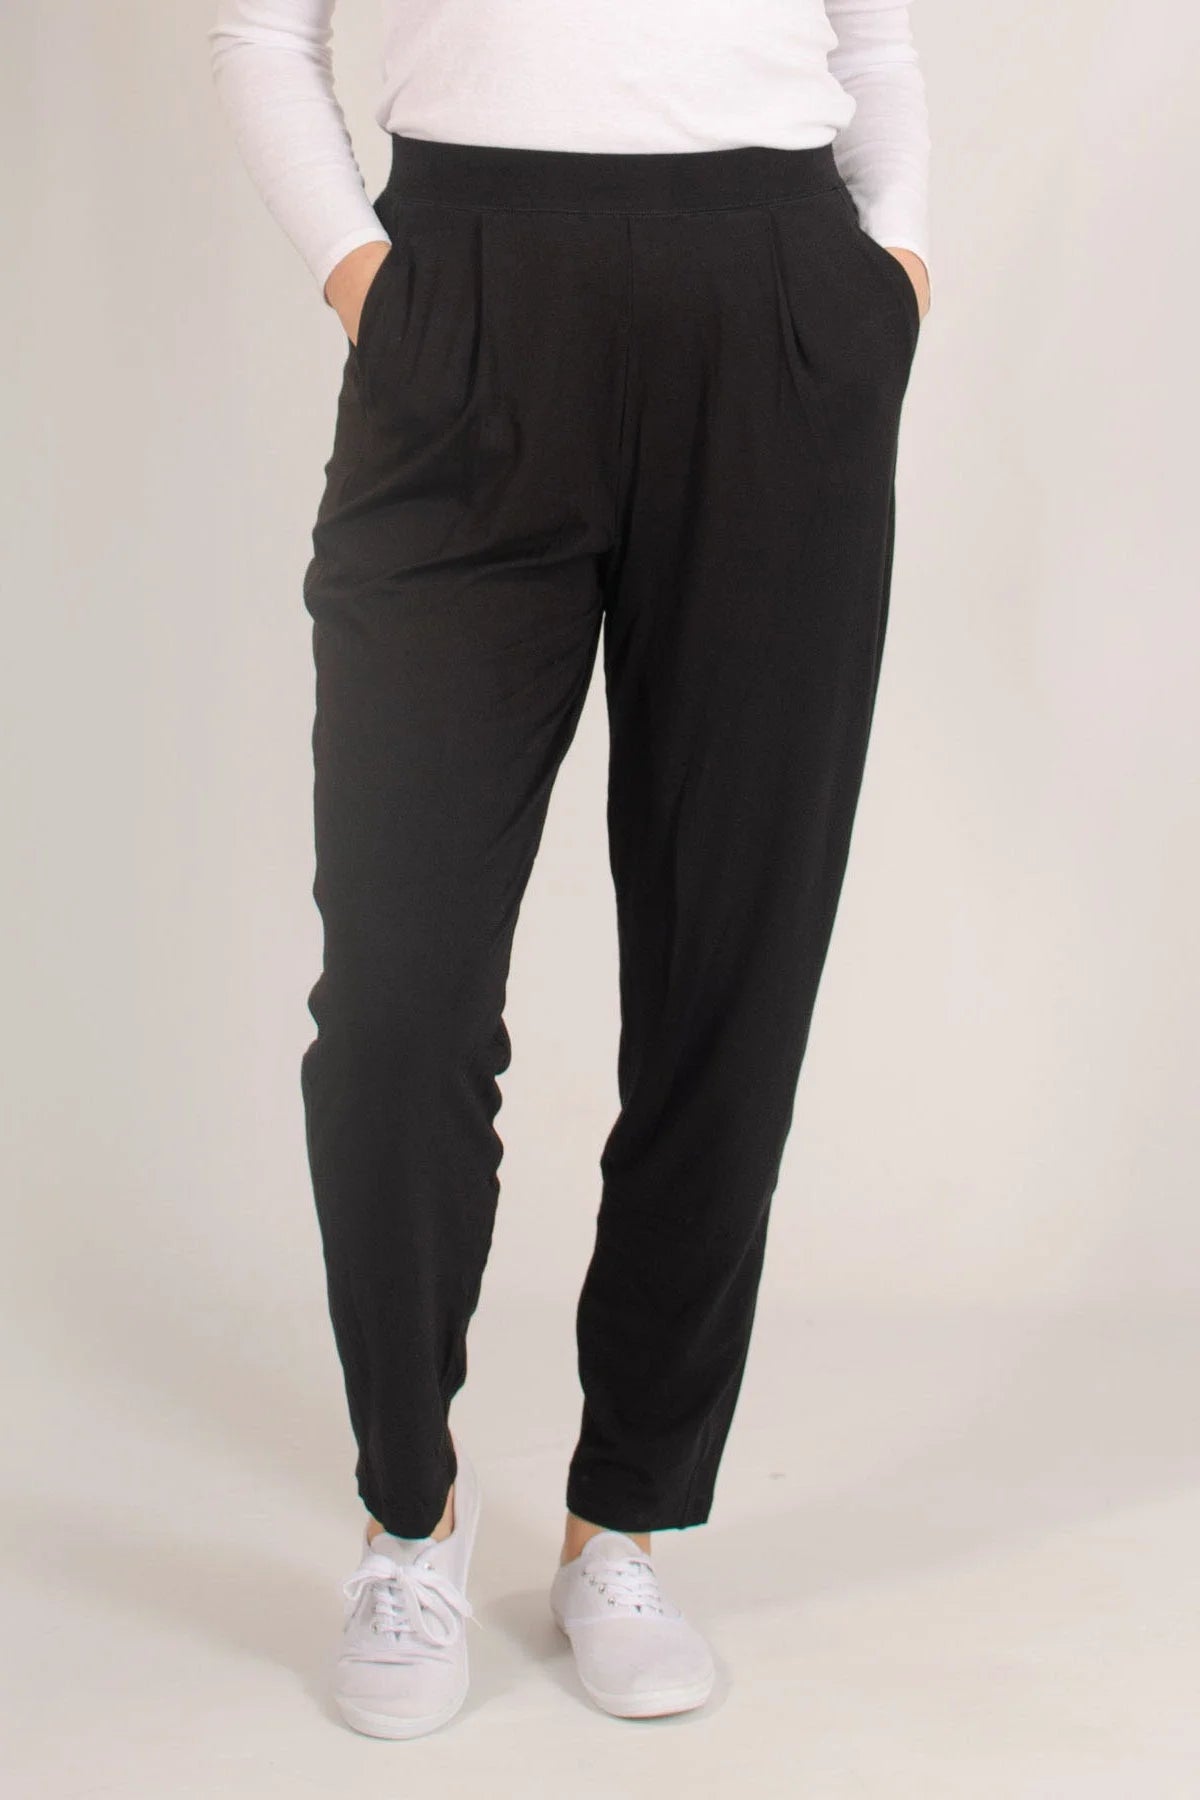 M&S Jersey Pleat Front Tapered Trousers Black / 18 / Long